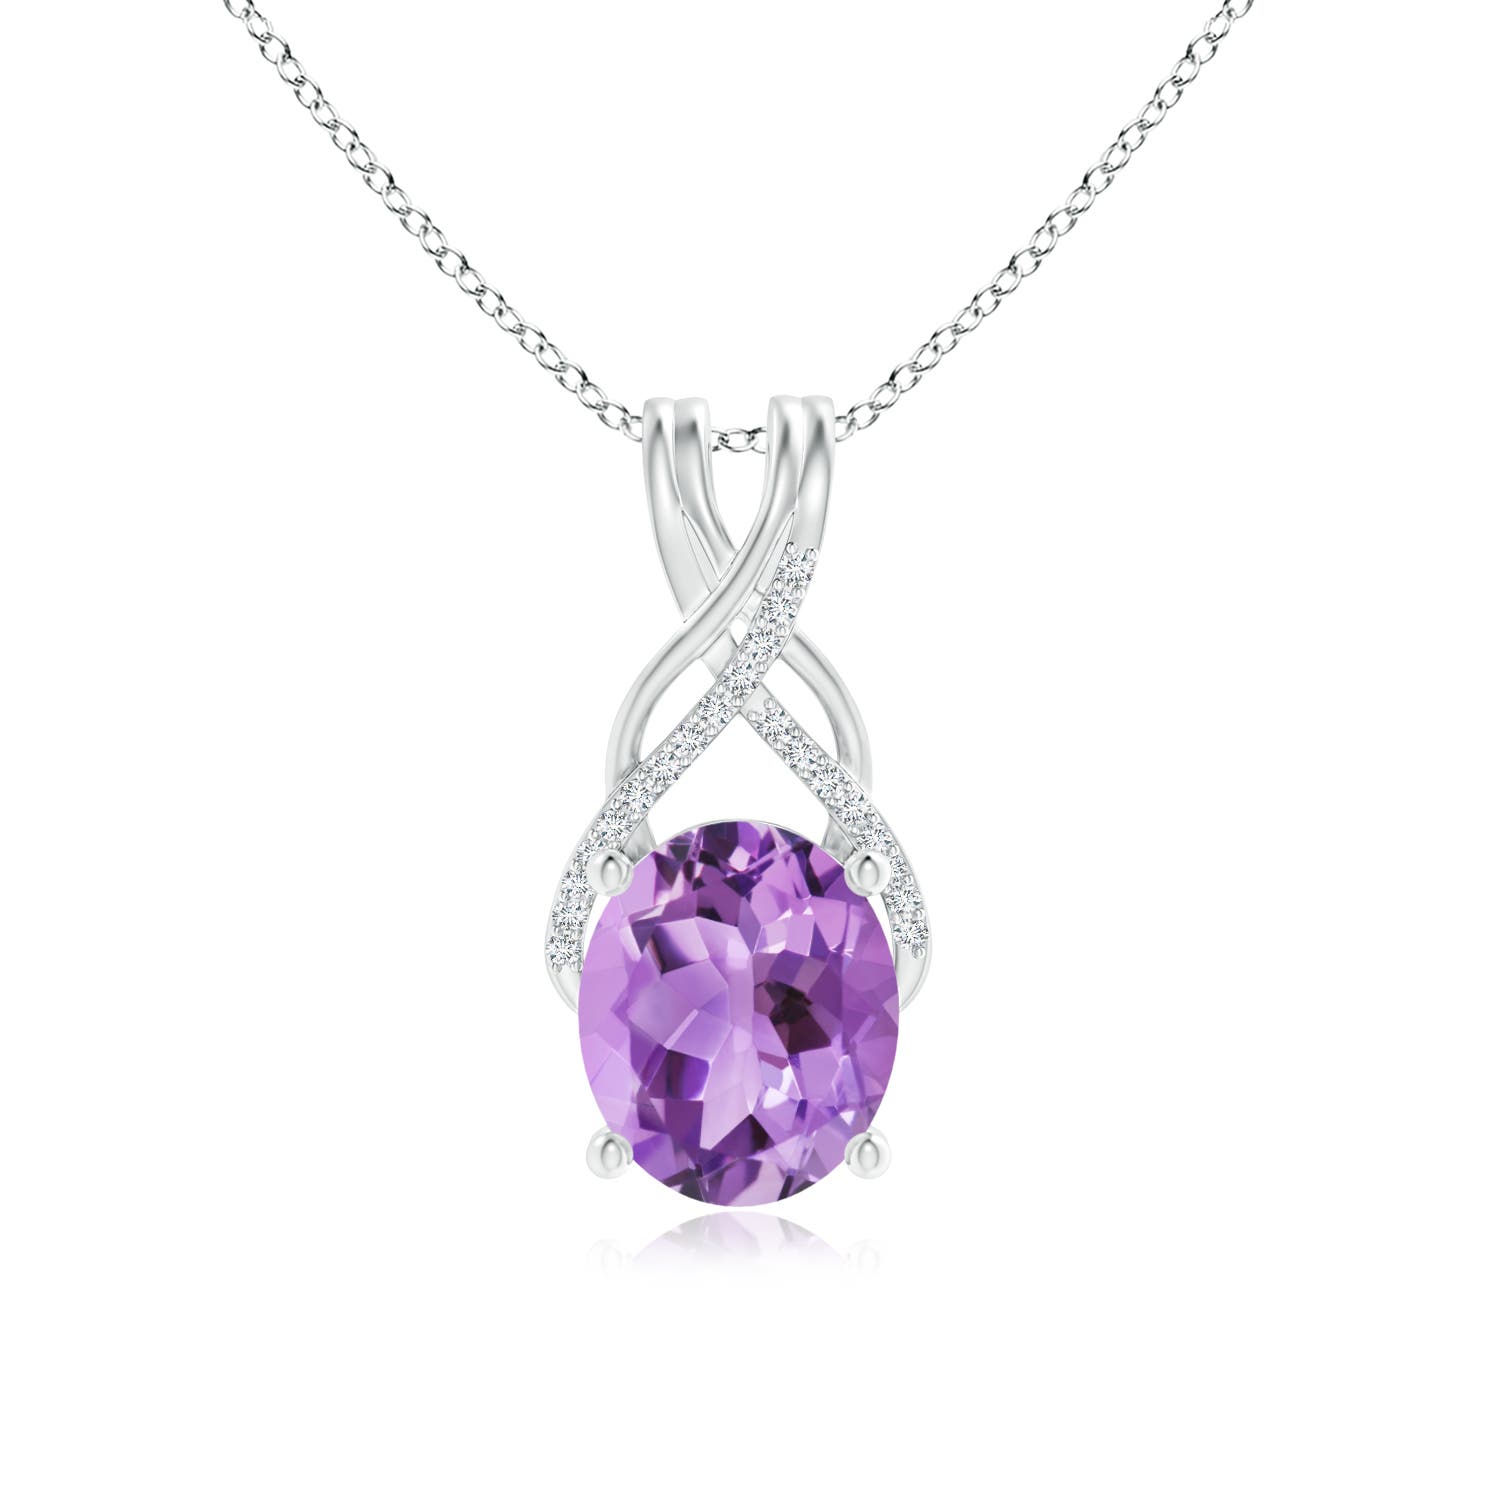 A - Amethyst / 4.43 CT / 14 KT White Gold